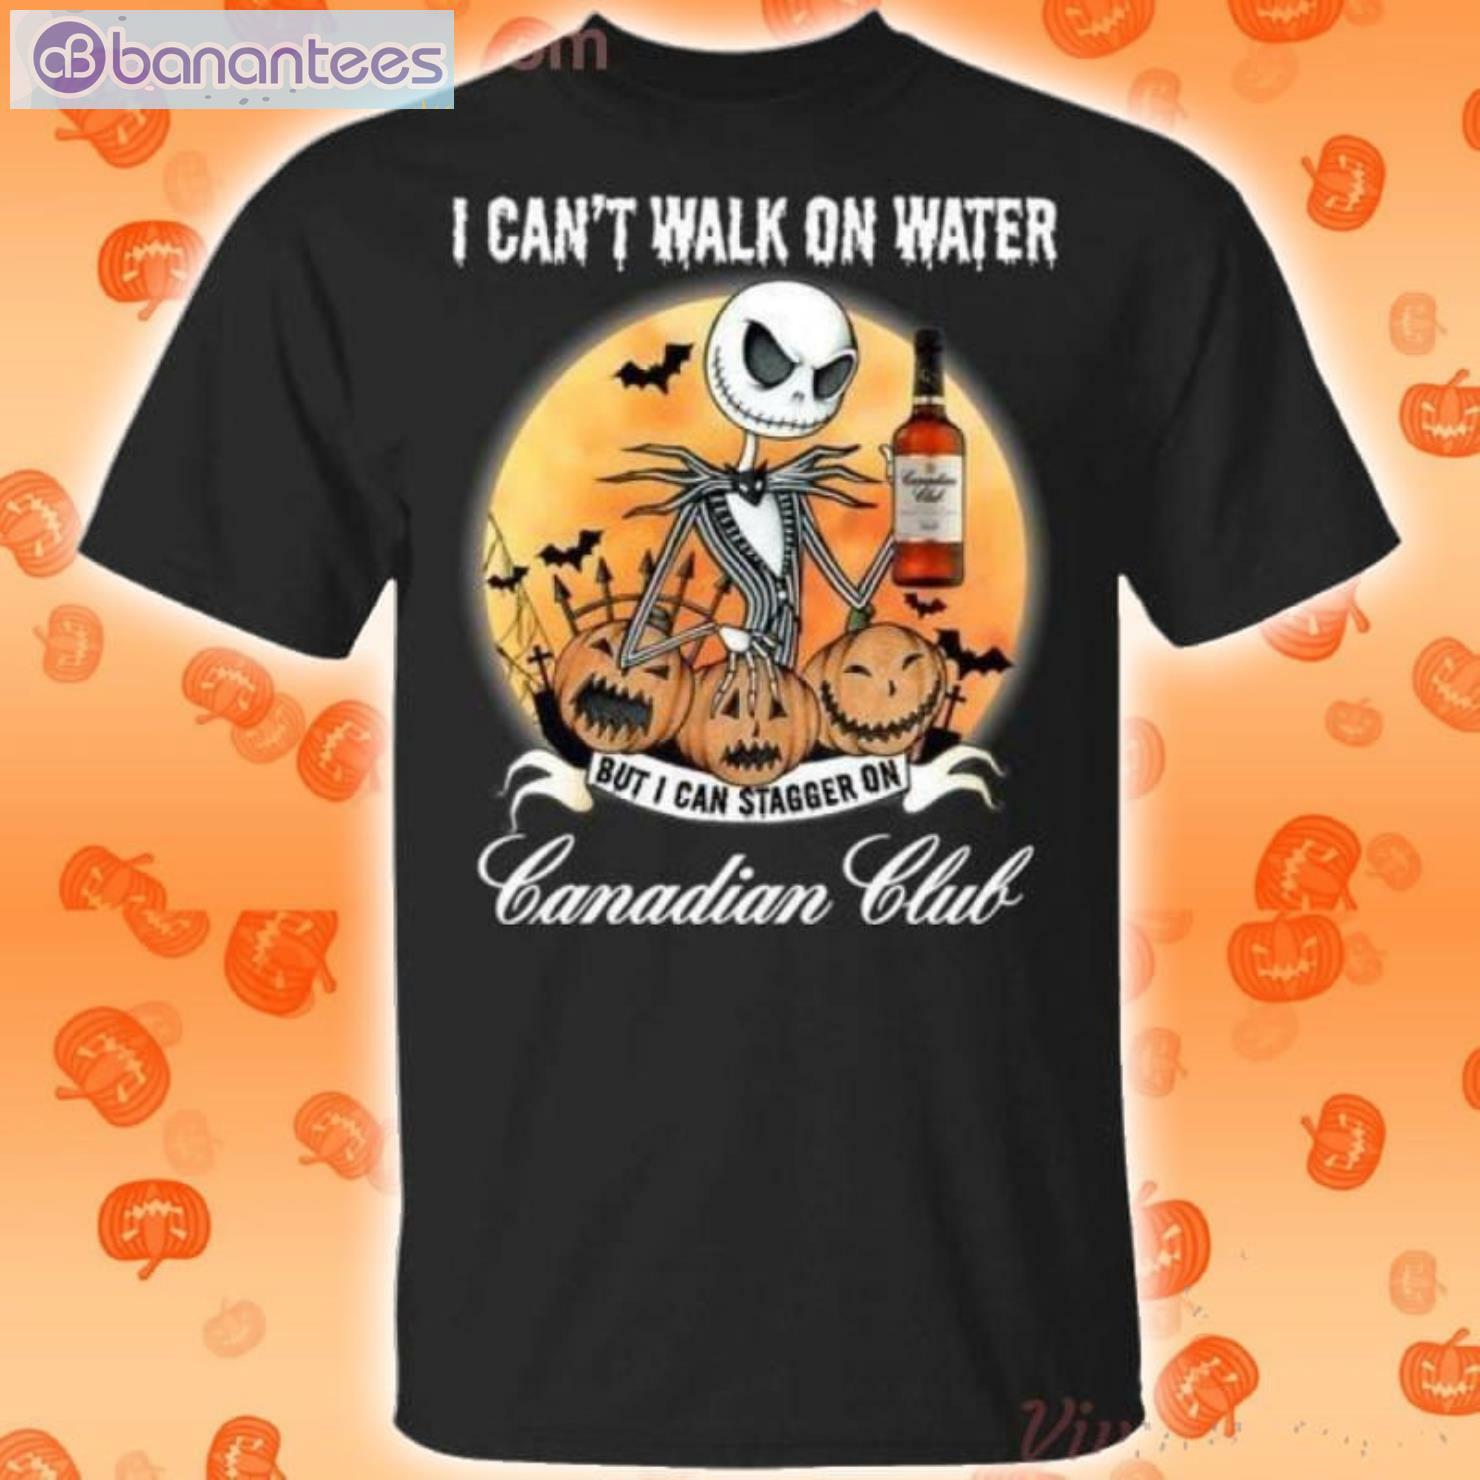 I Can Stagger On Canadian Club Whisky Jack Skellington Halloween T-Shirt Product Photo 1 Product photo 1